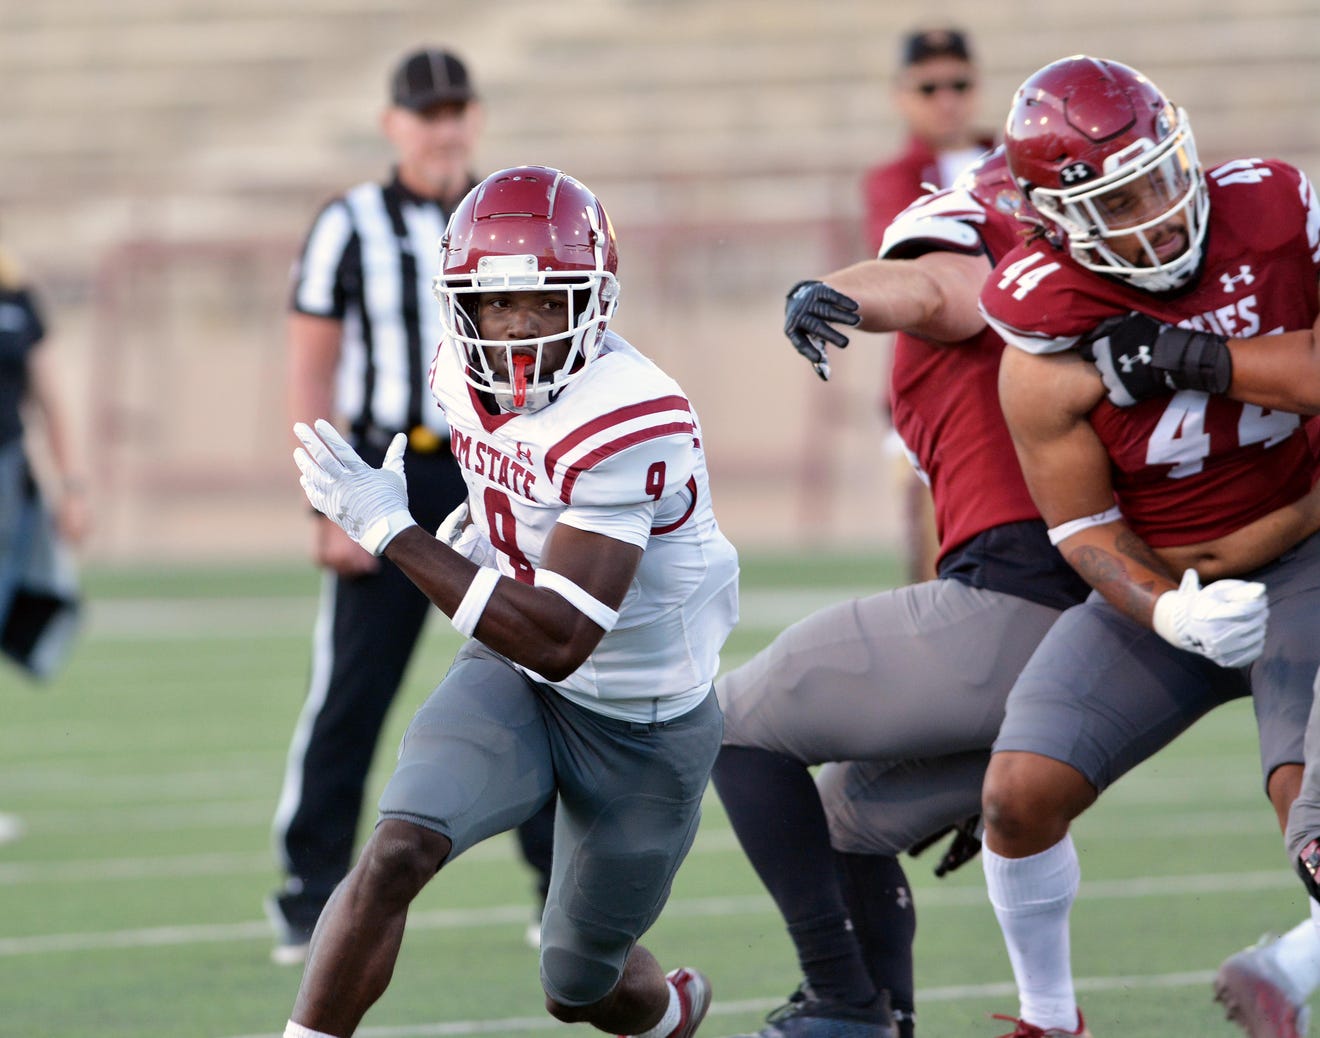 Transfers will give New Mexico State football a chance in 2022, as well